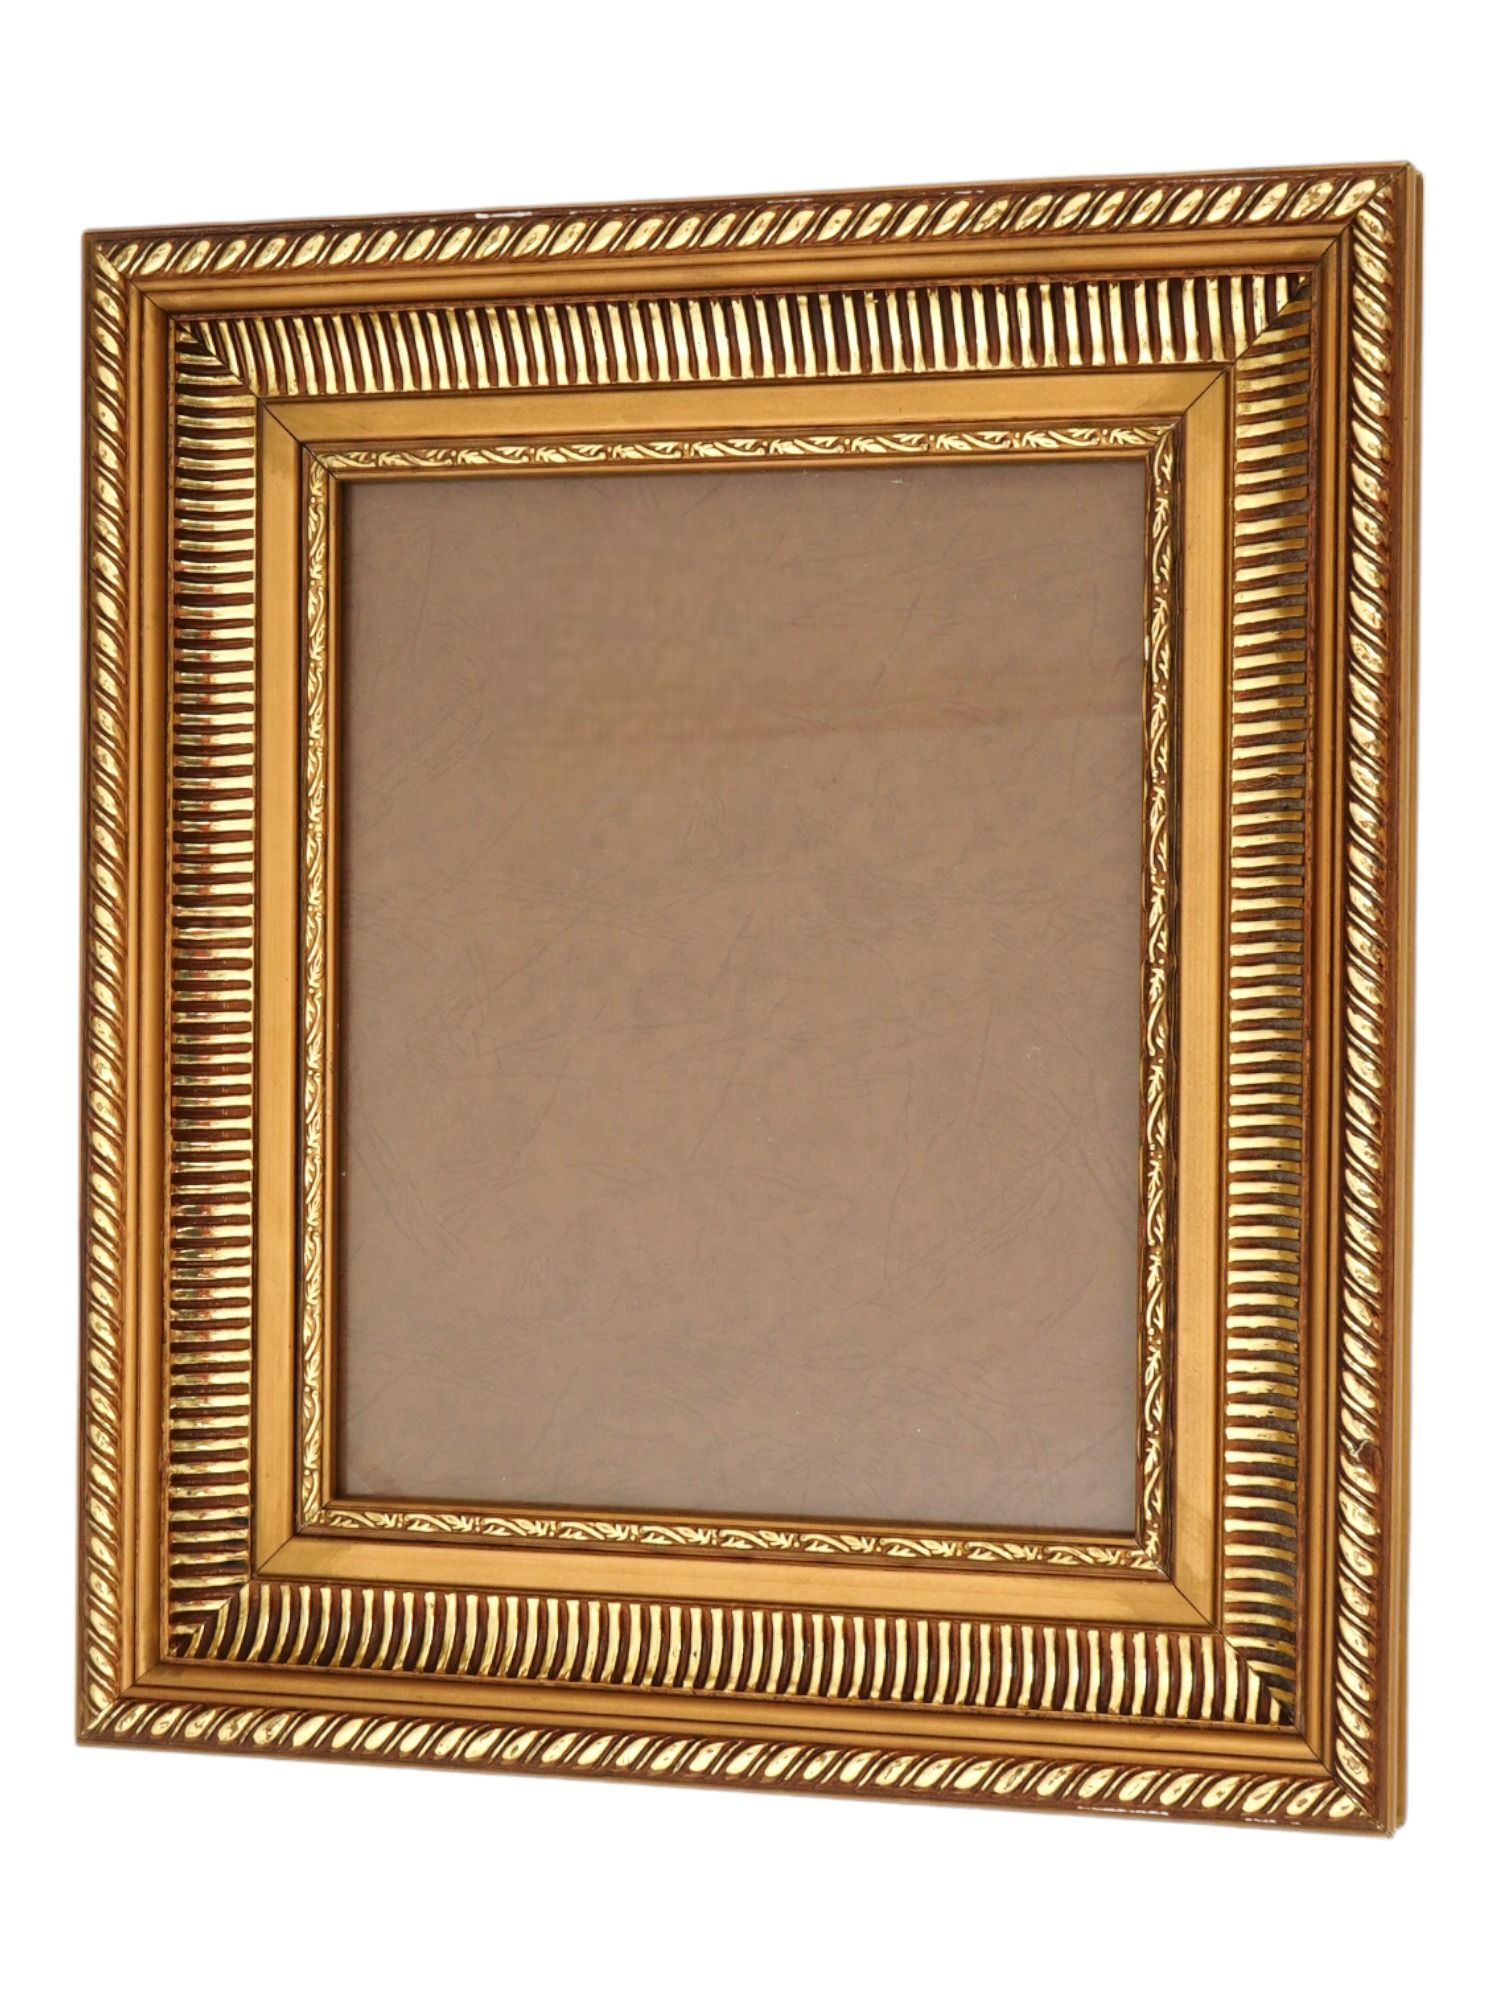 COLLECTION OF EUROPEAN SCHOOL GILT WOODEN FRAMES PIC-3